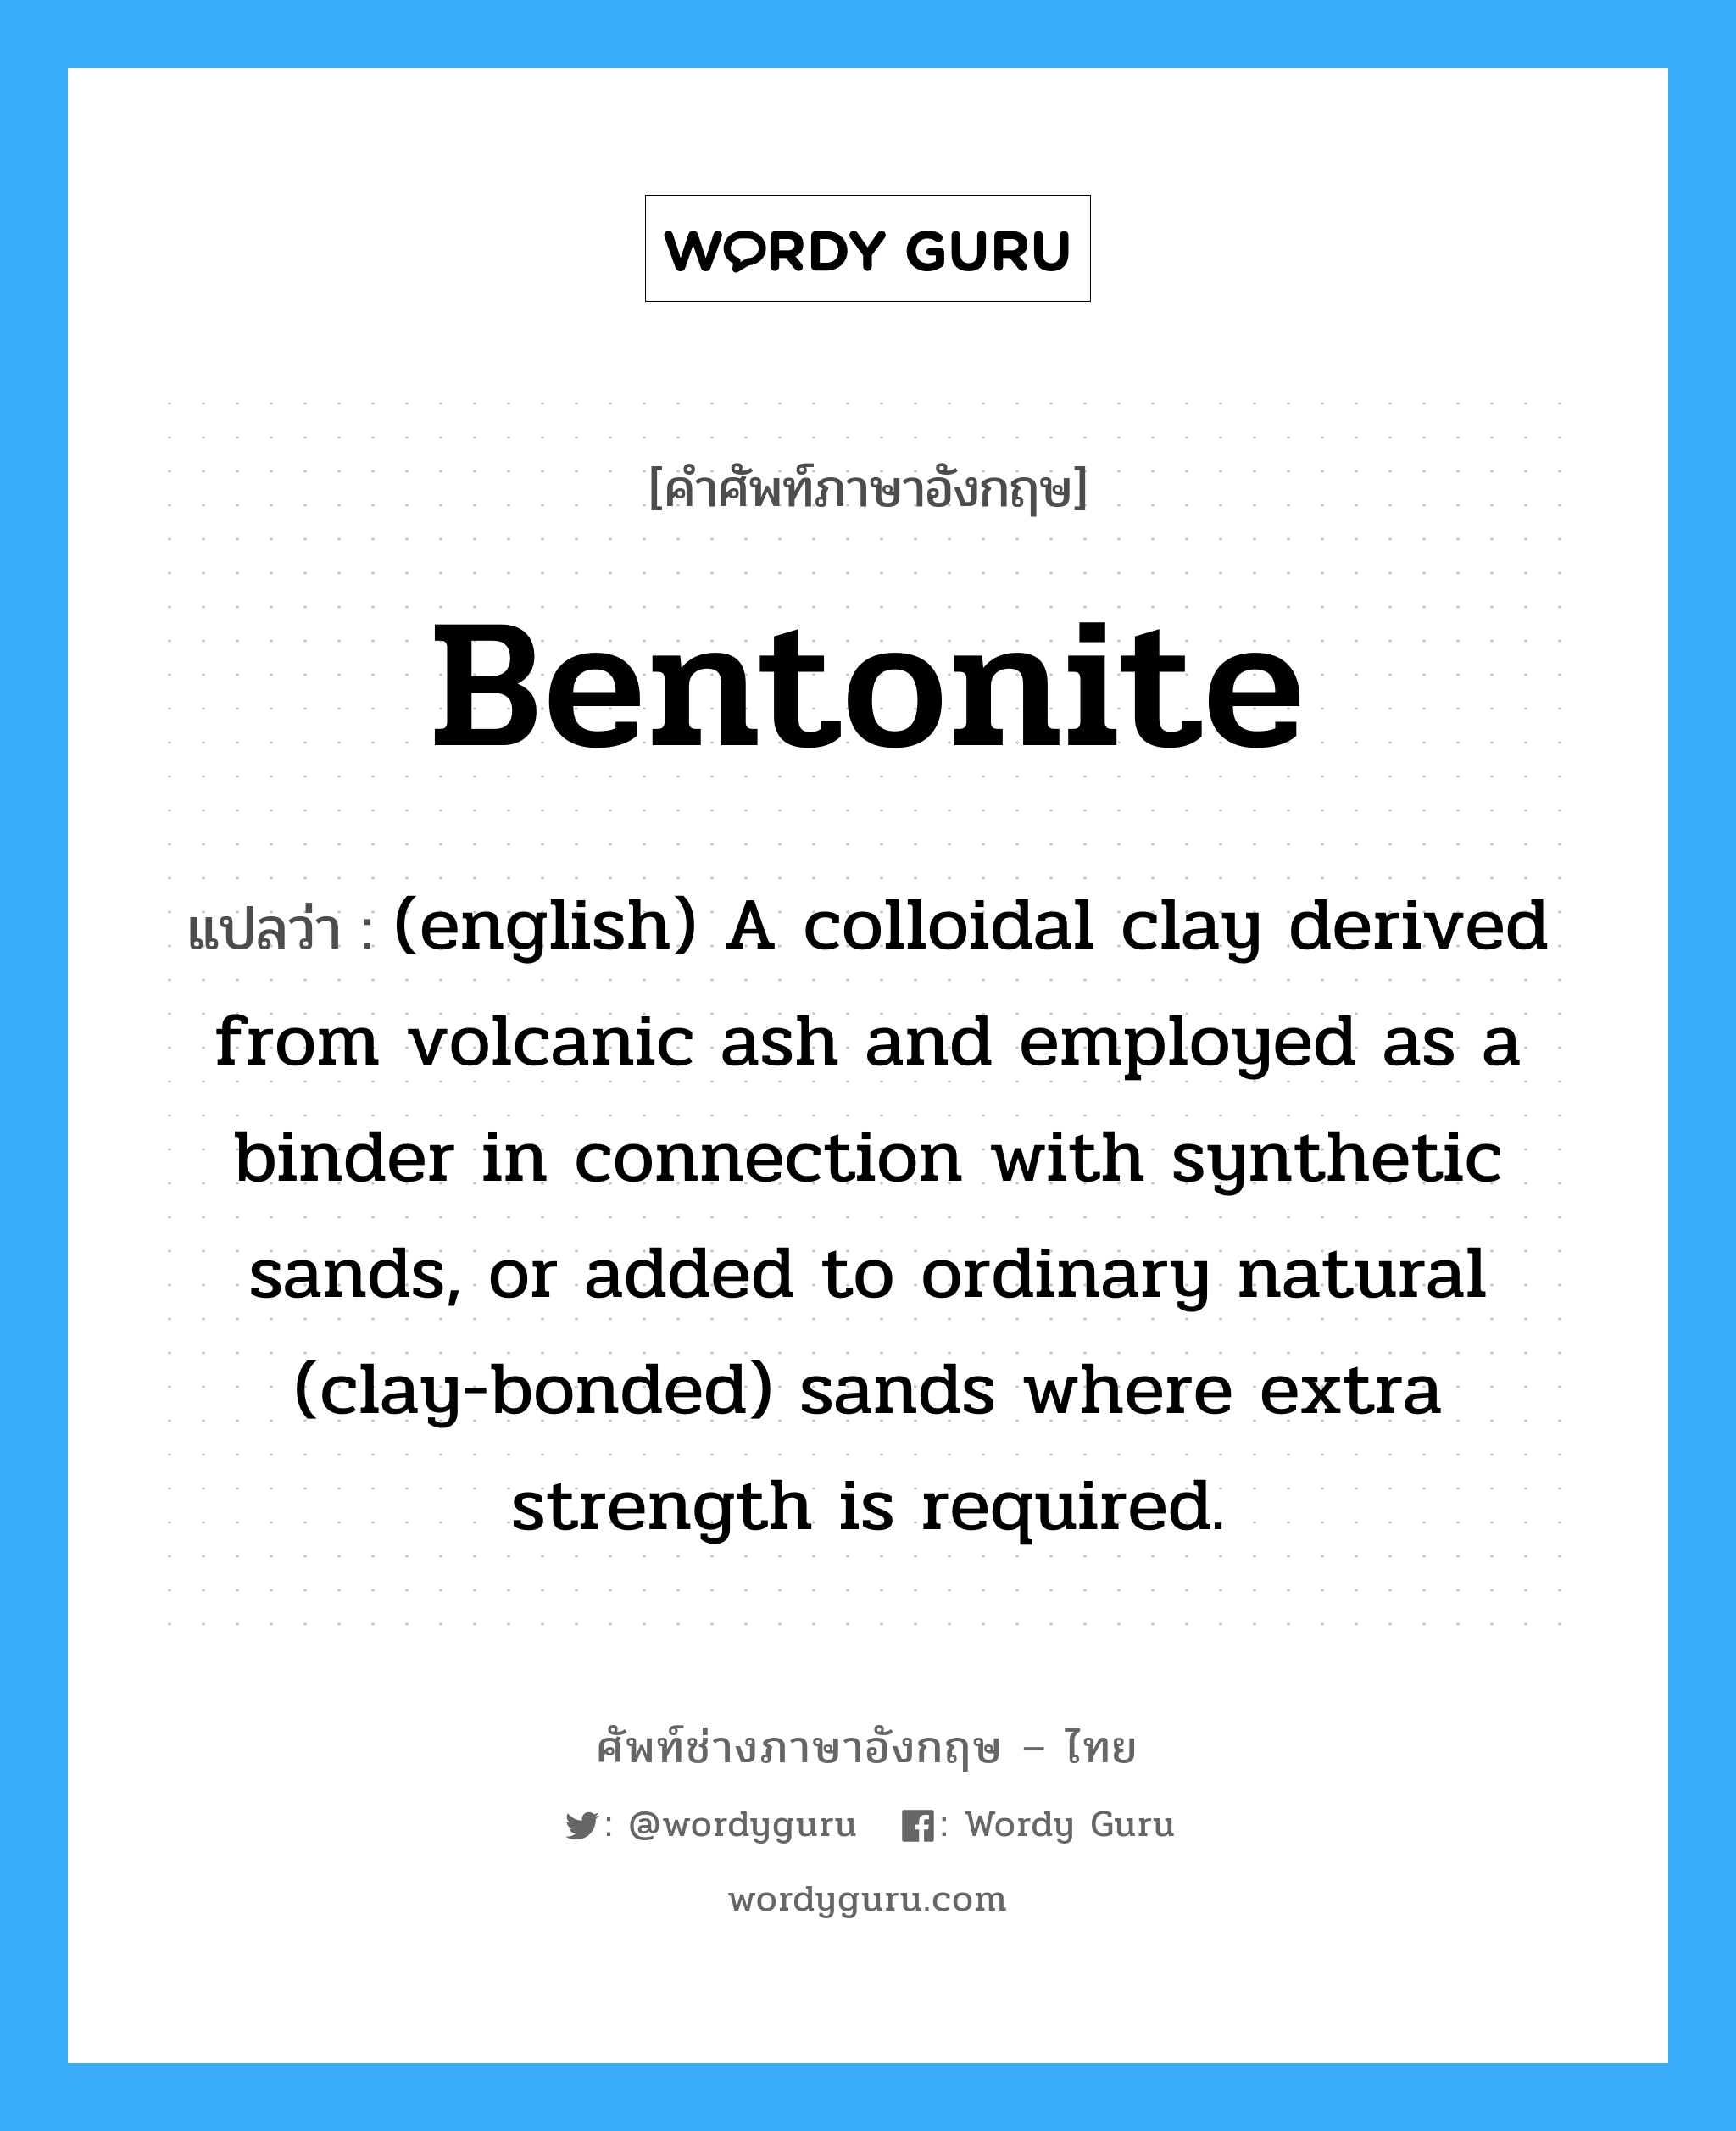 Bentonite แปลว่า?, คำศัพท์ช่างภาษาอังกฤษ - ไทย Bentonite คำศัพท์ภาษาอังกฤษ Bentonite แปลว่า (english) A colloidal clay derived from volcanic ash and employed as a binder in connection with synthetic sands, or added to ordinary natural (clay-bonded) sands where extra strength is required.